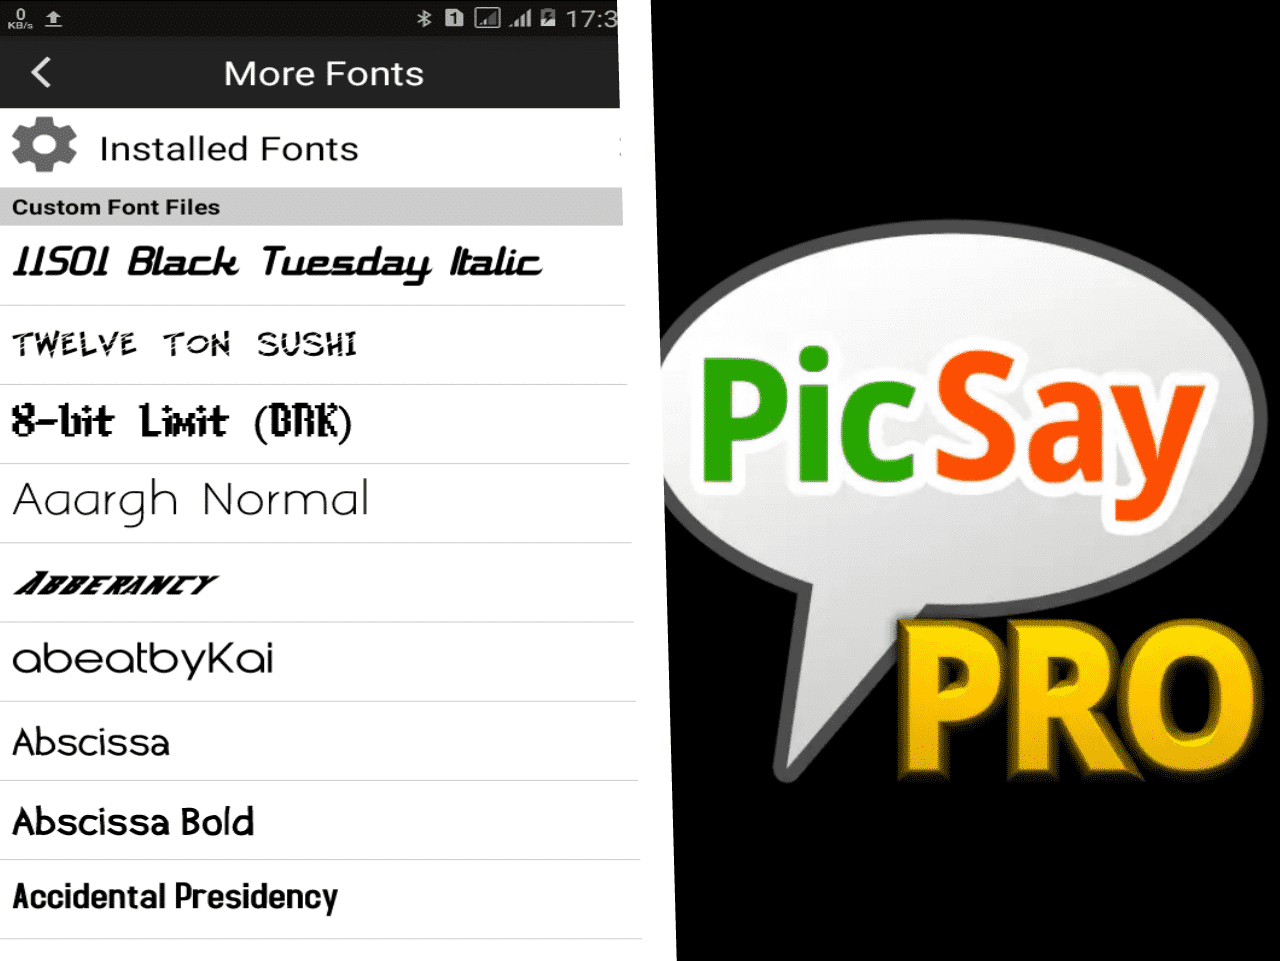 Overview-Picsay-Pro